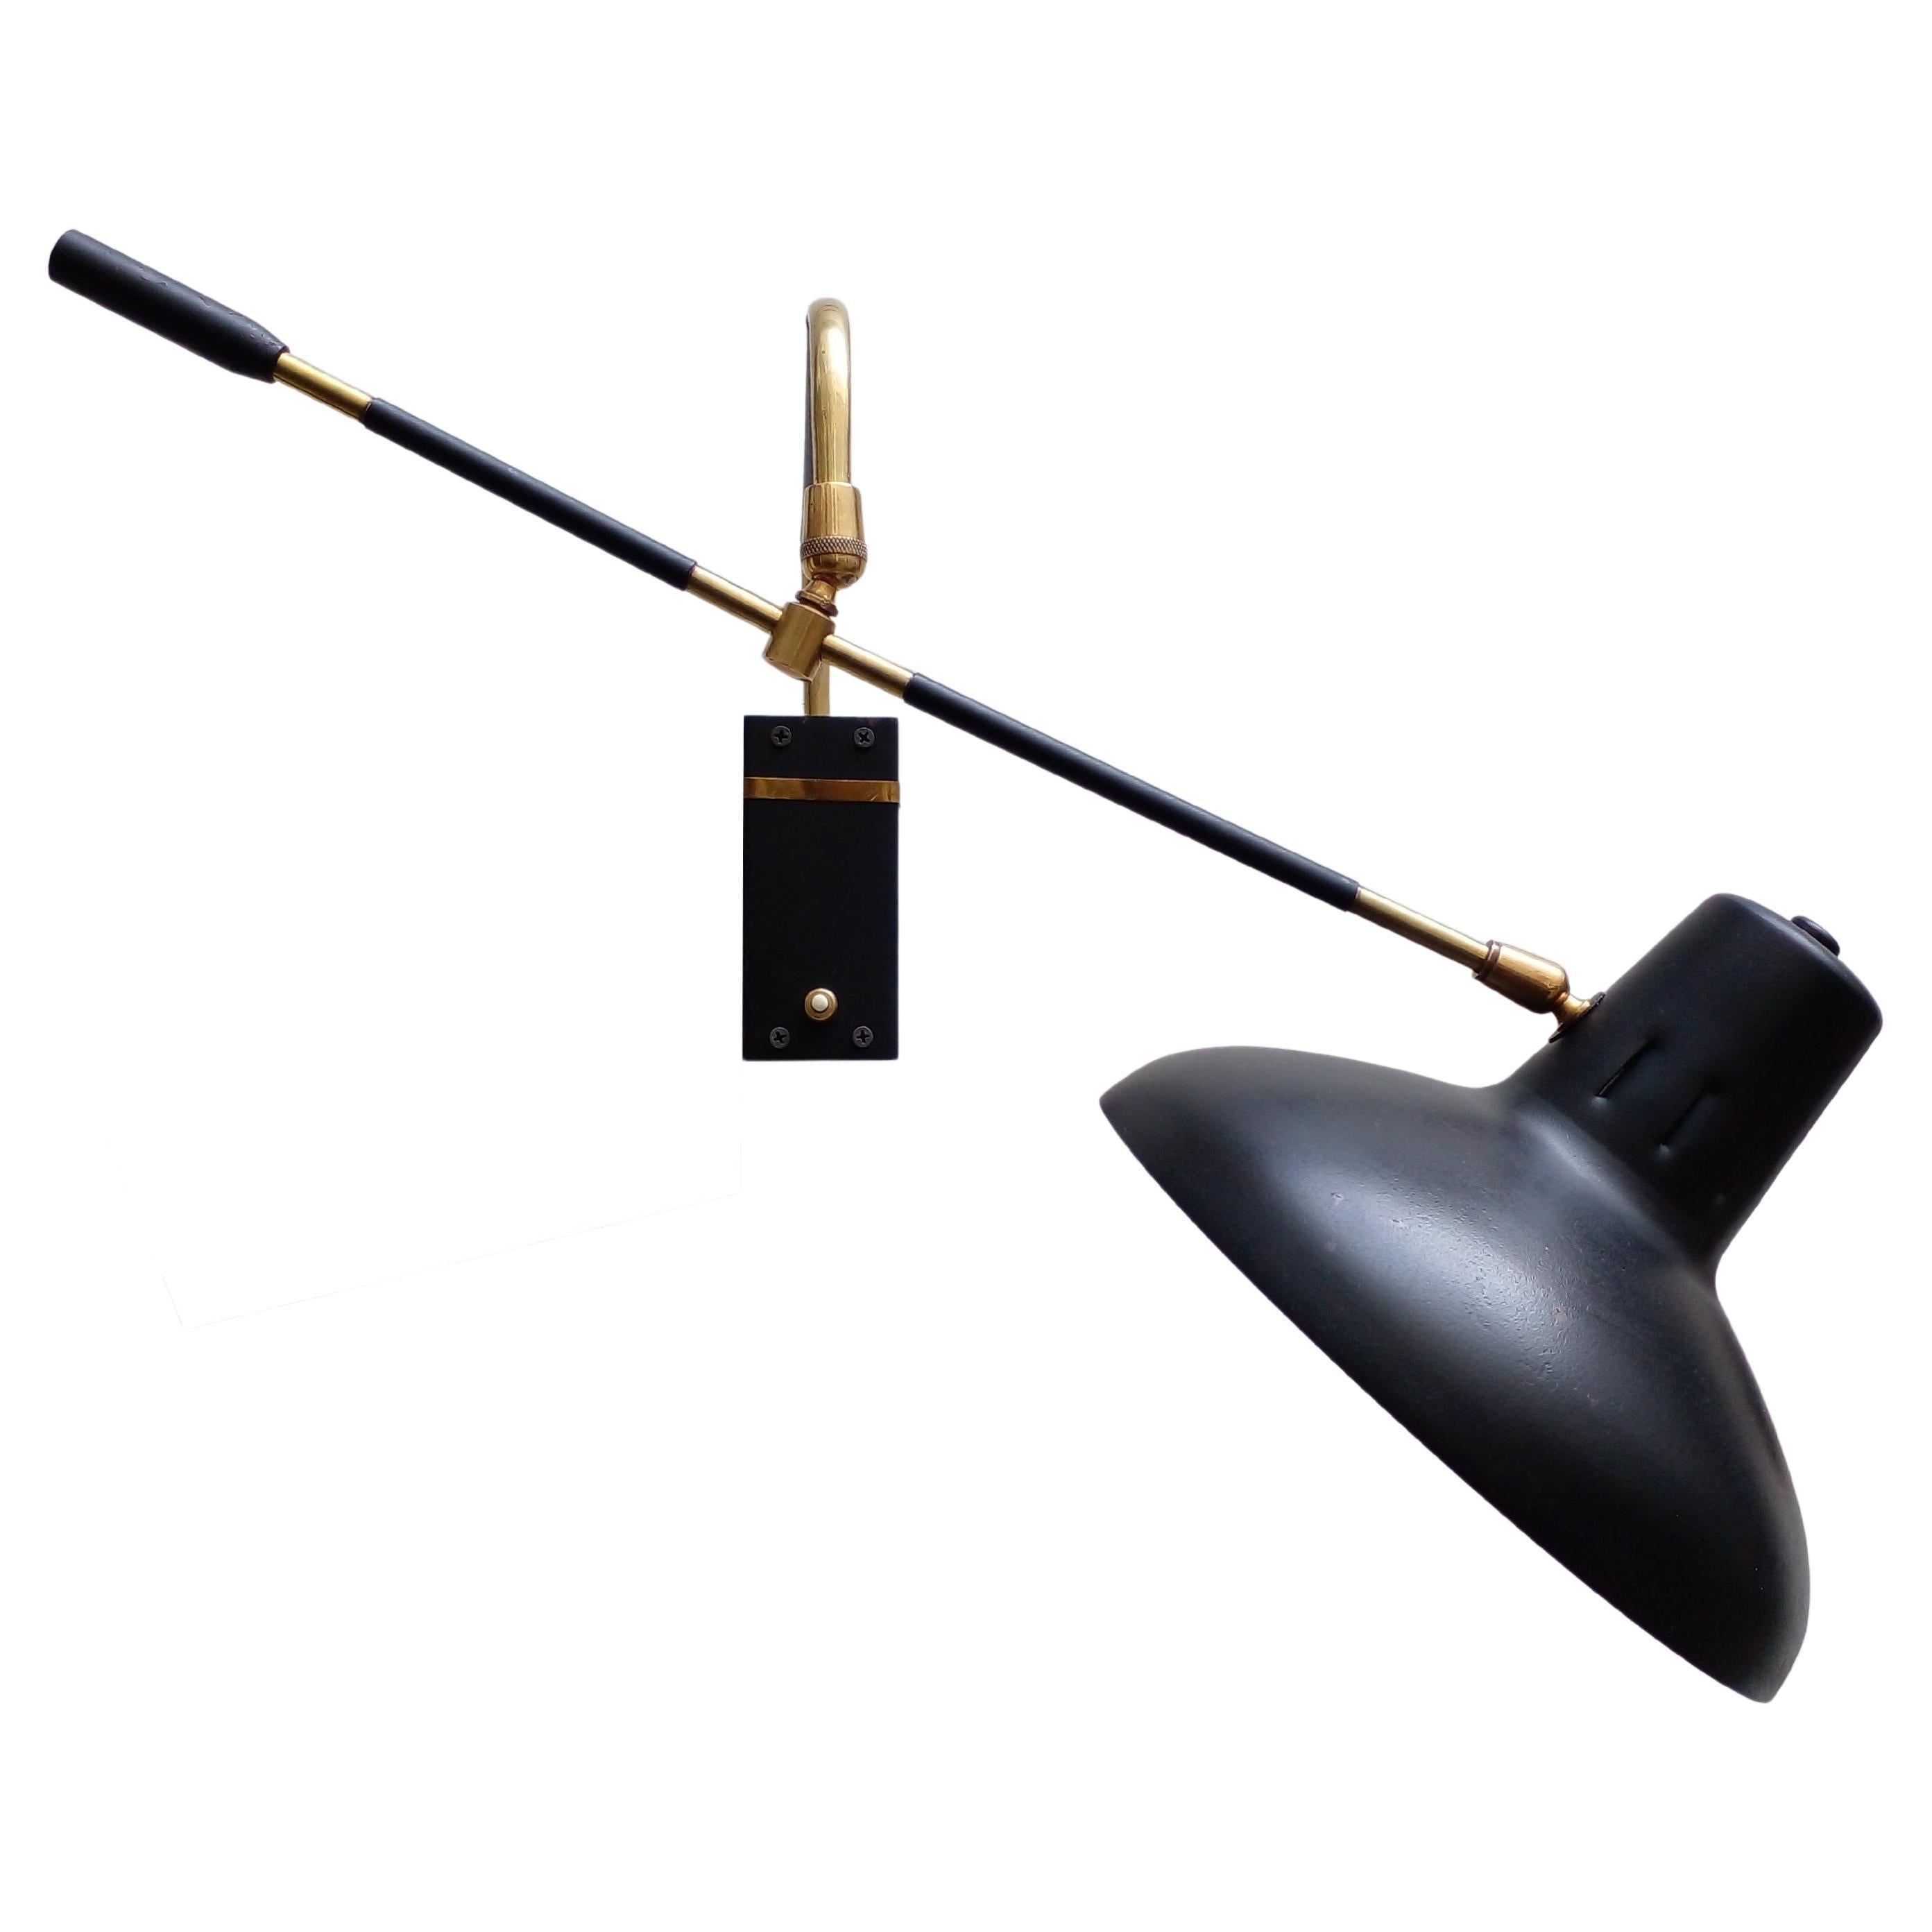 Multi-adjustable wall lamp in black lacquered iron and brass, Italy around 1950. 
The arm fixed to the wall plate swivels to 380° and the adjustable light arm has two ball joints.
Lampshade is lacquered in white color.